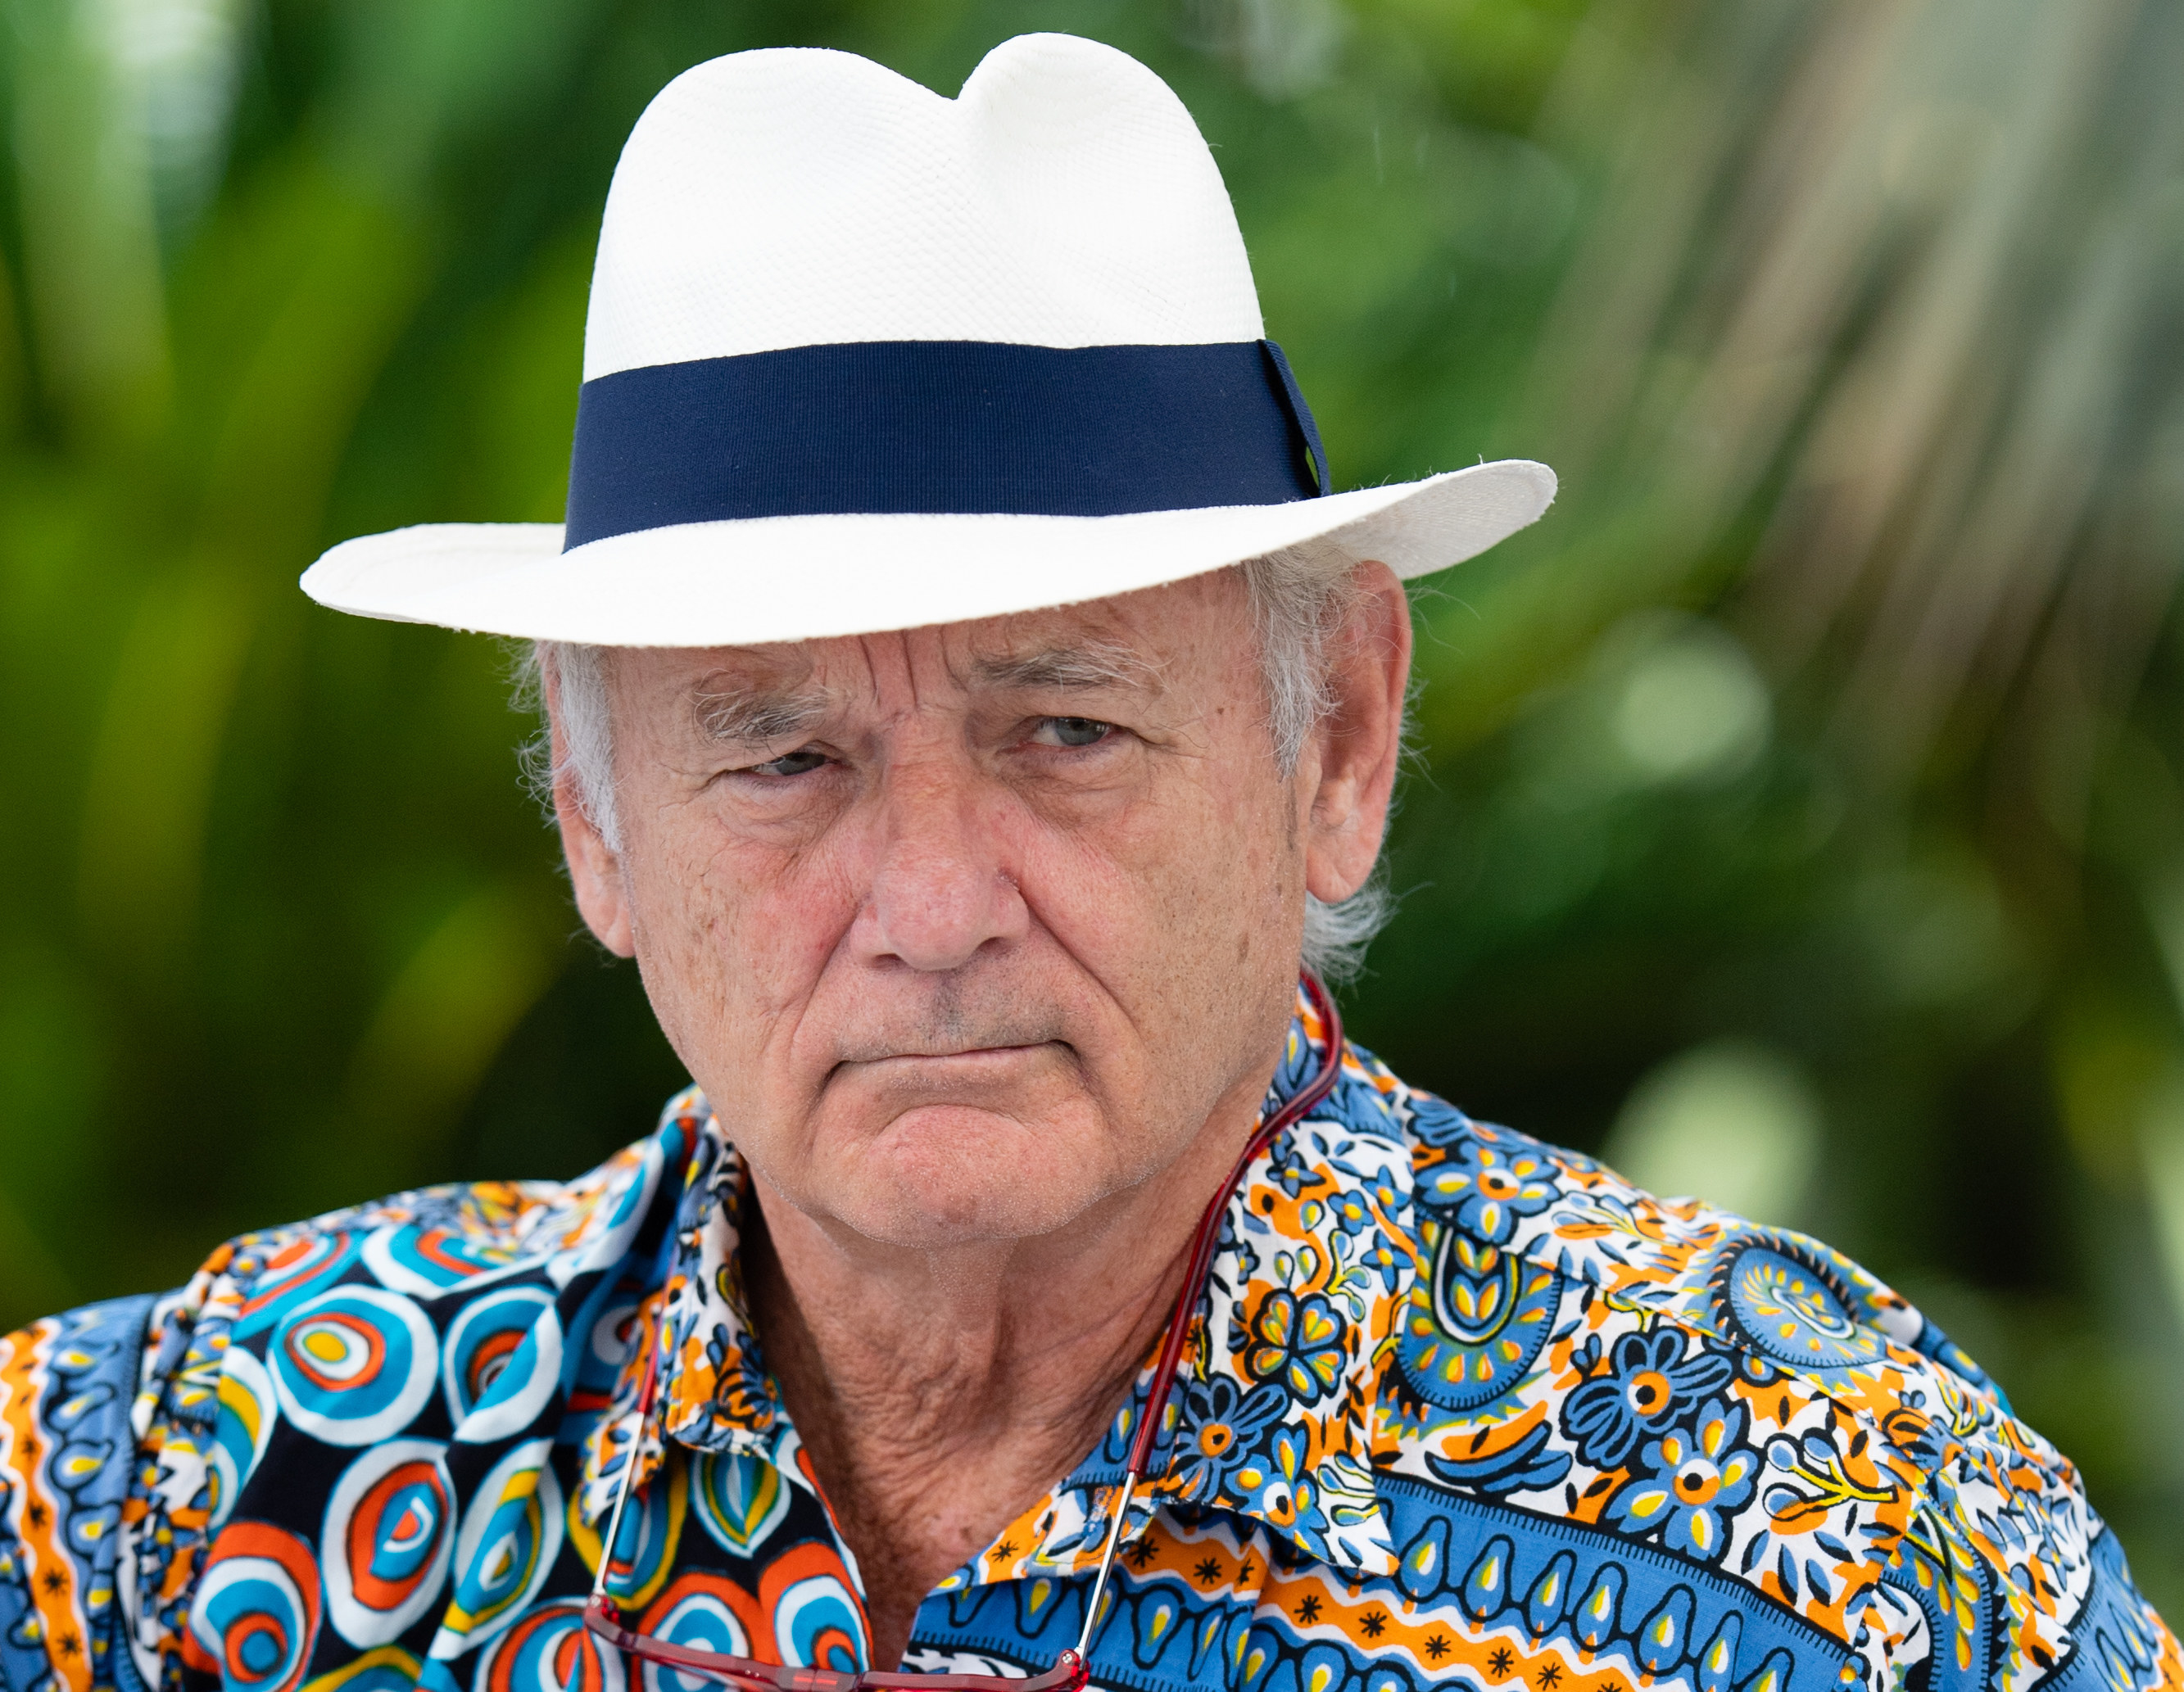 Bill Murray attends a film premiere at the Cannes Film Festival in 2021